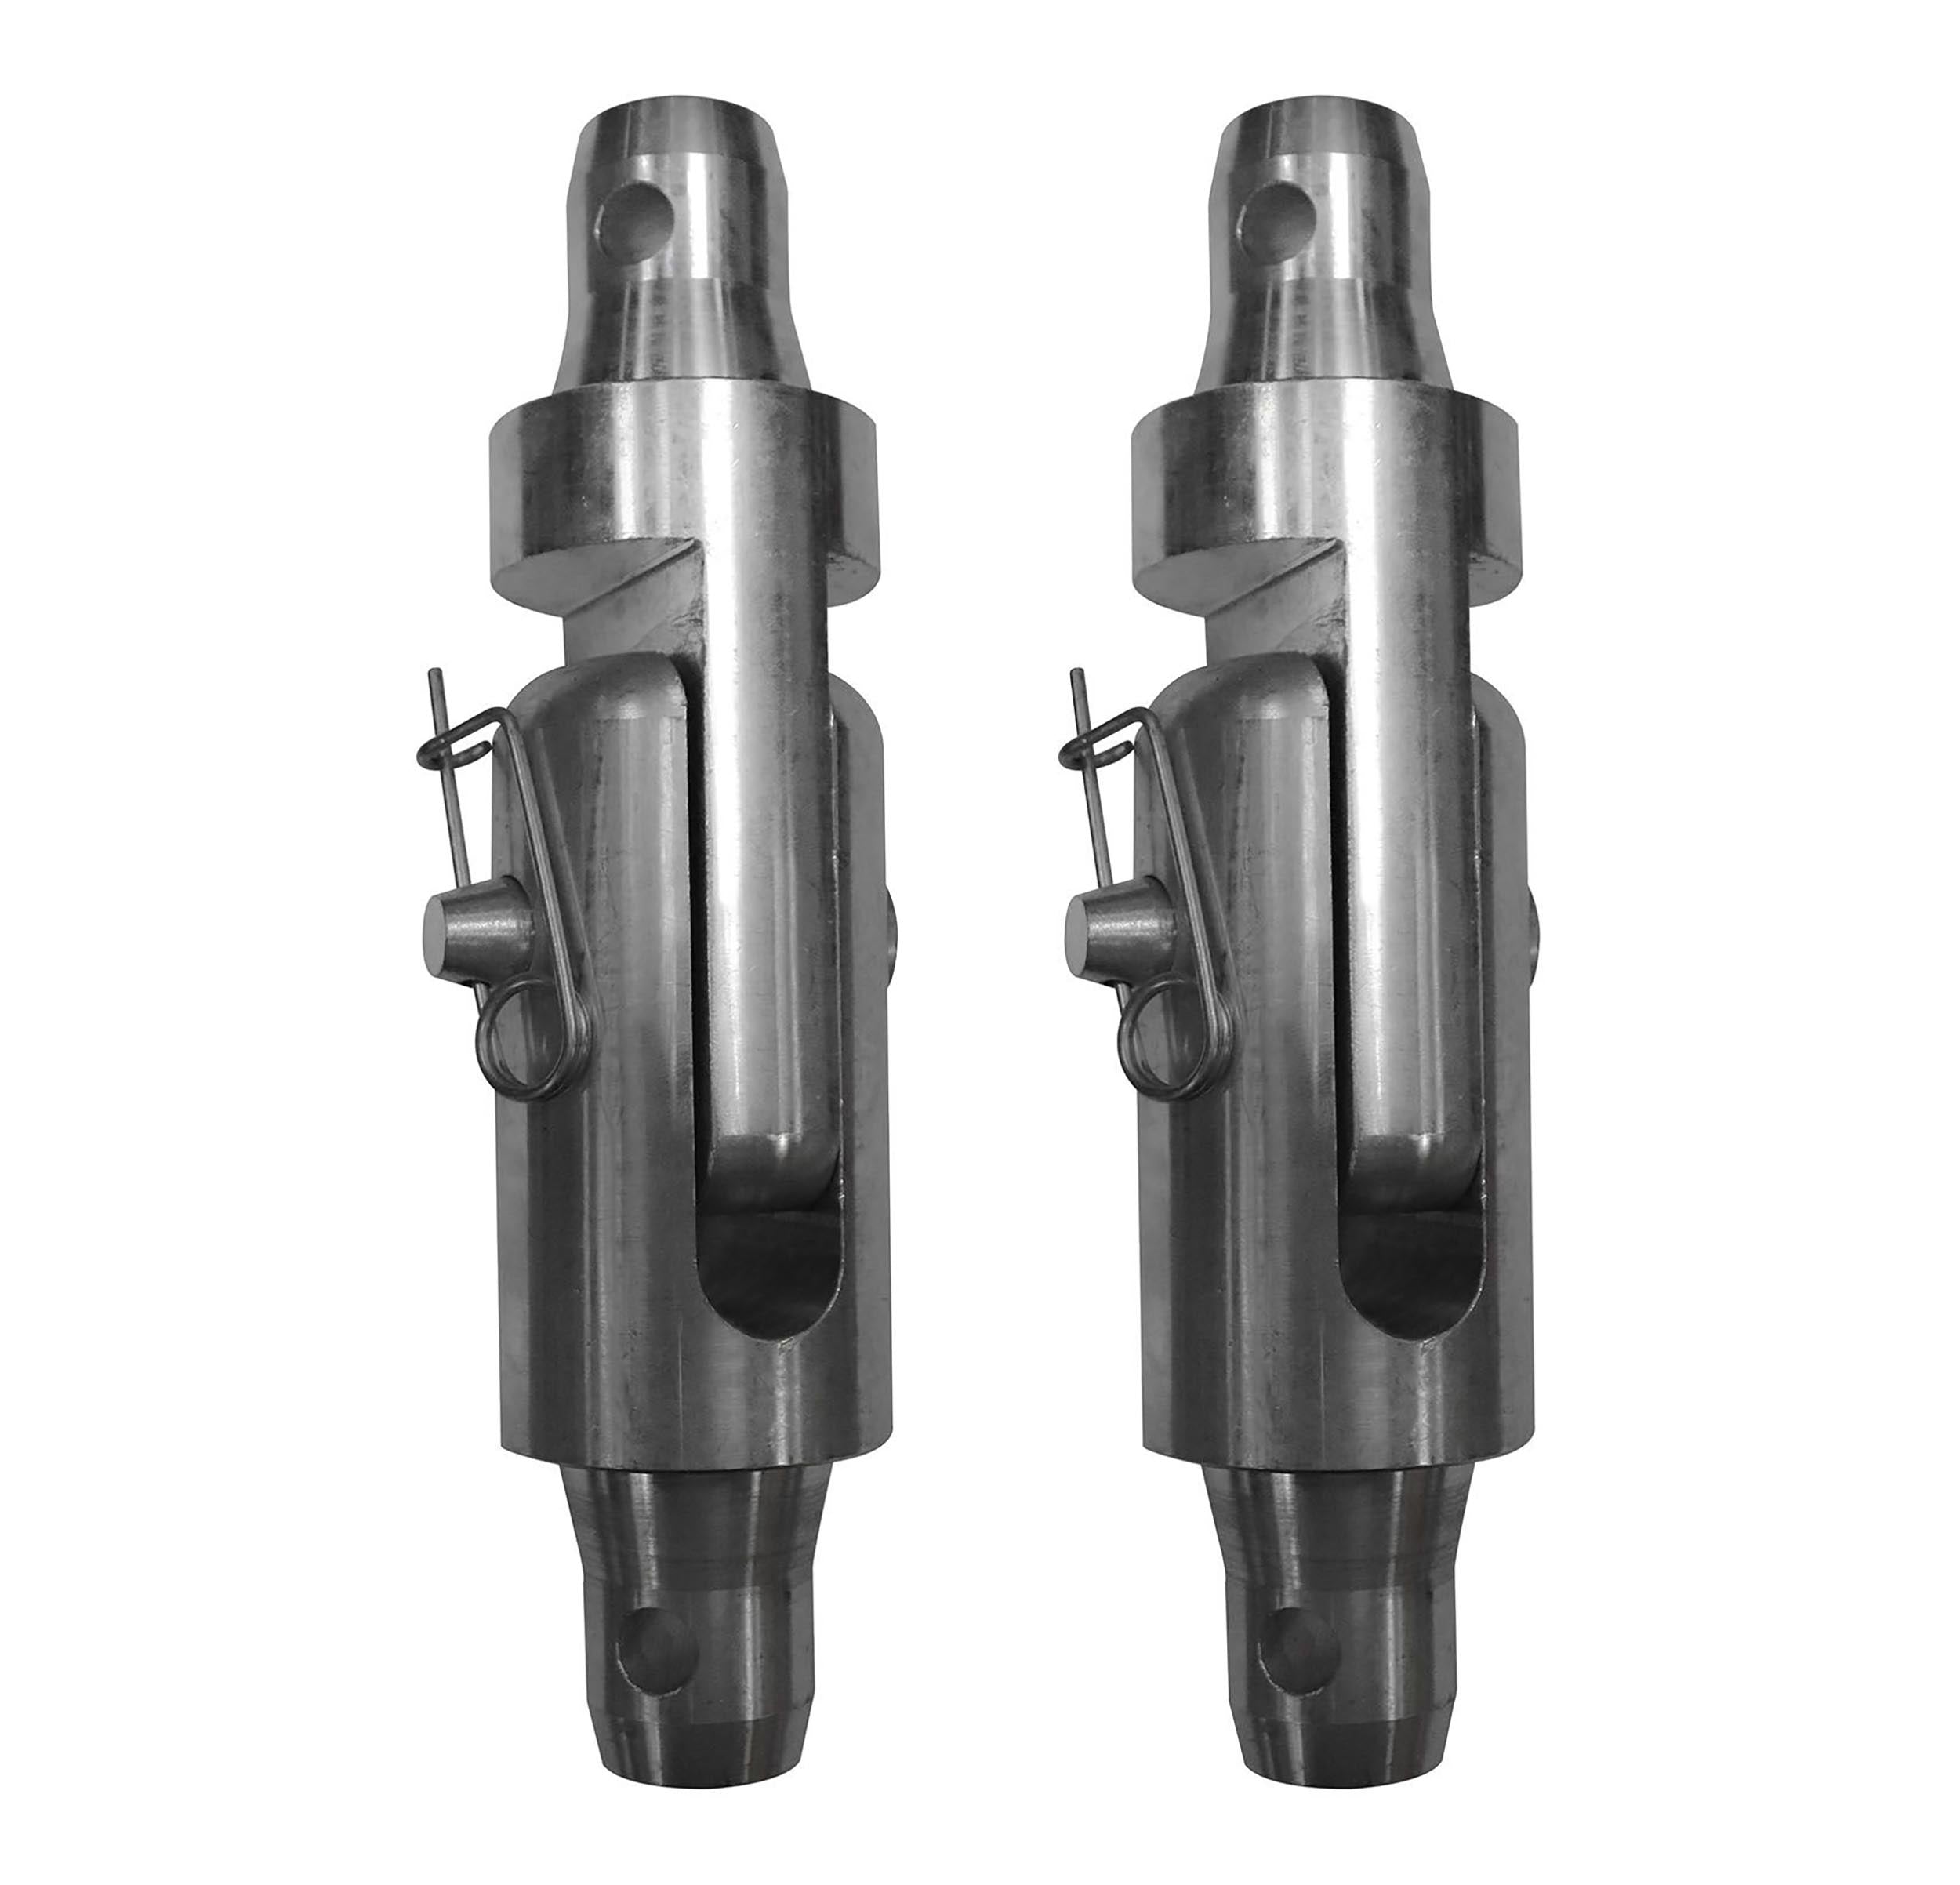 Show Solutions SCTGS-290HS, Conical Truss Tower System Hinges (1 x Right & 1 x Left) by Show Solutions